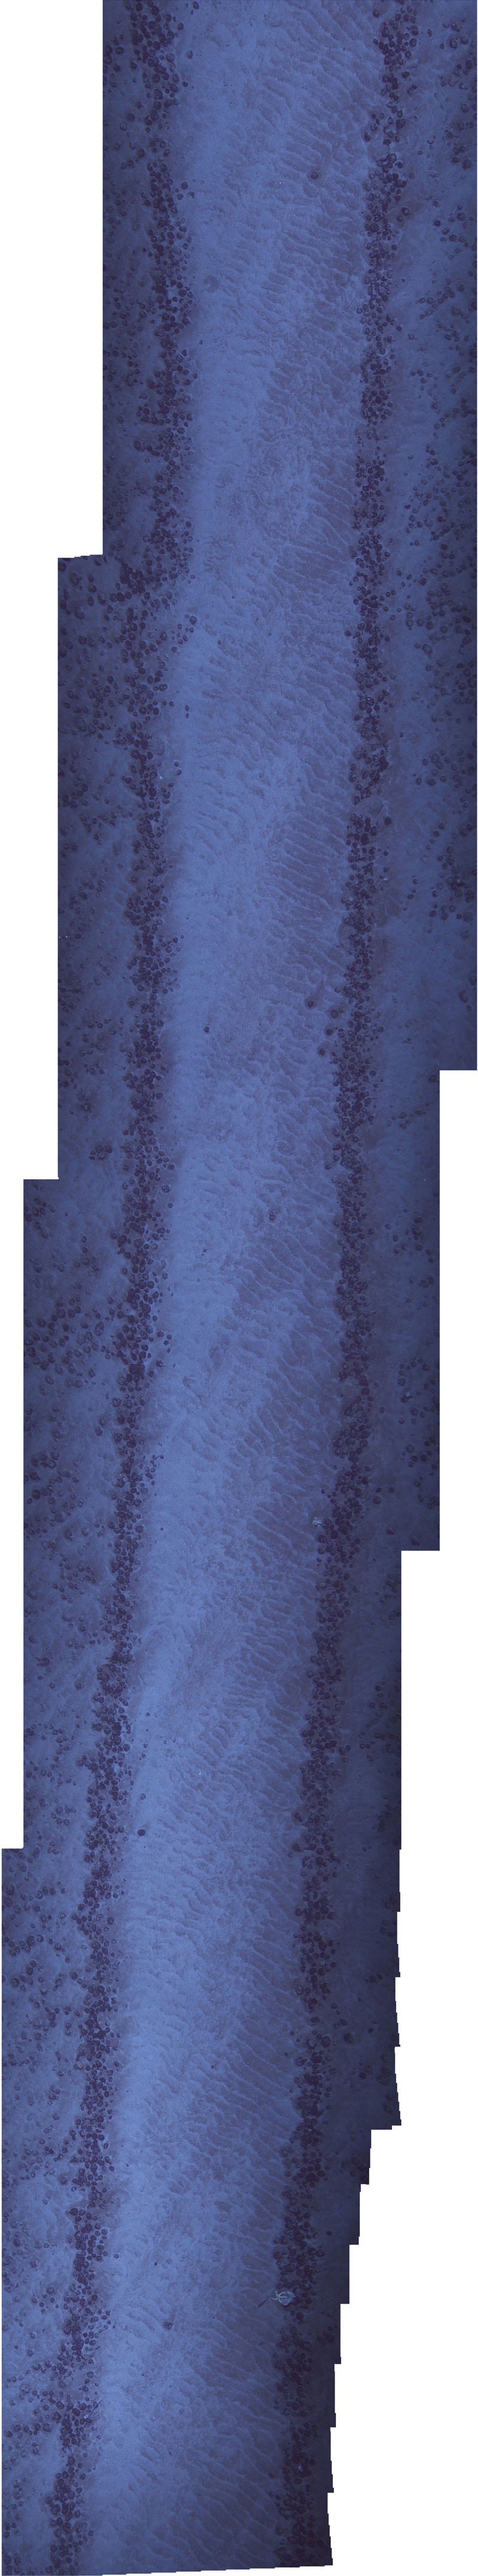 Seafloor disturbance is evident in this photomosaic, which represents a section of seafloor about 8-by-26 meters (26-by-85 feet) in size. It’s a fraction of the many kilometers of disturbance observed during 2022’s Investigation of a Historic Seabed Mining Equipment Test Site on the Blake Plateau.